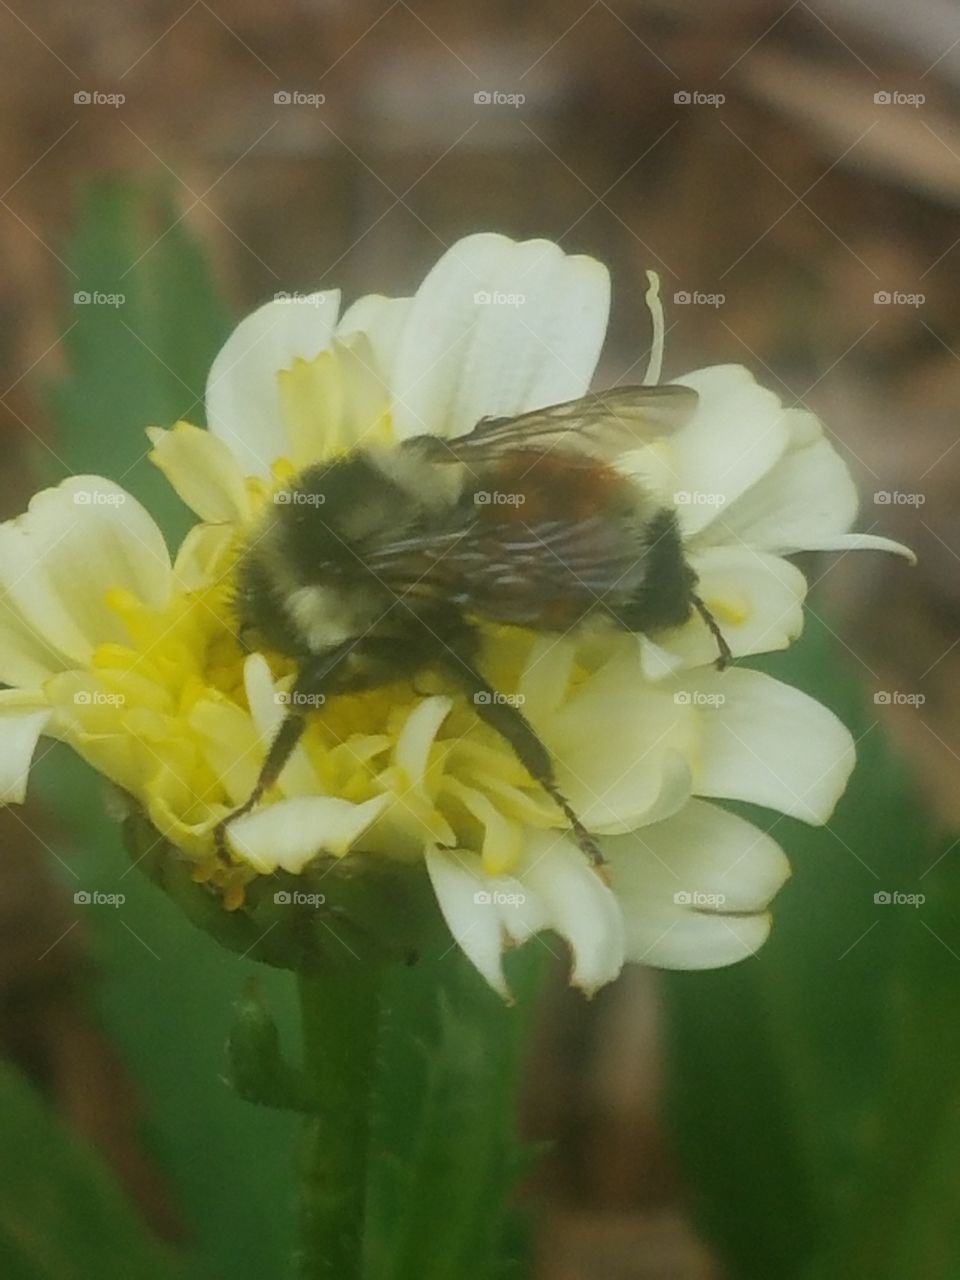 Bumble bee on yellow flower